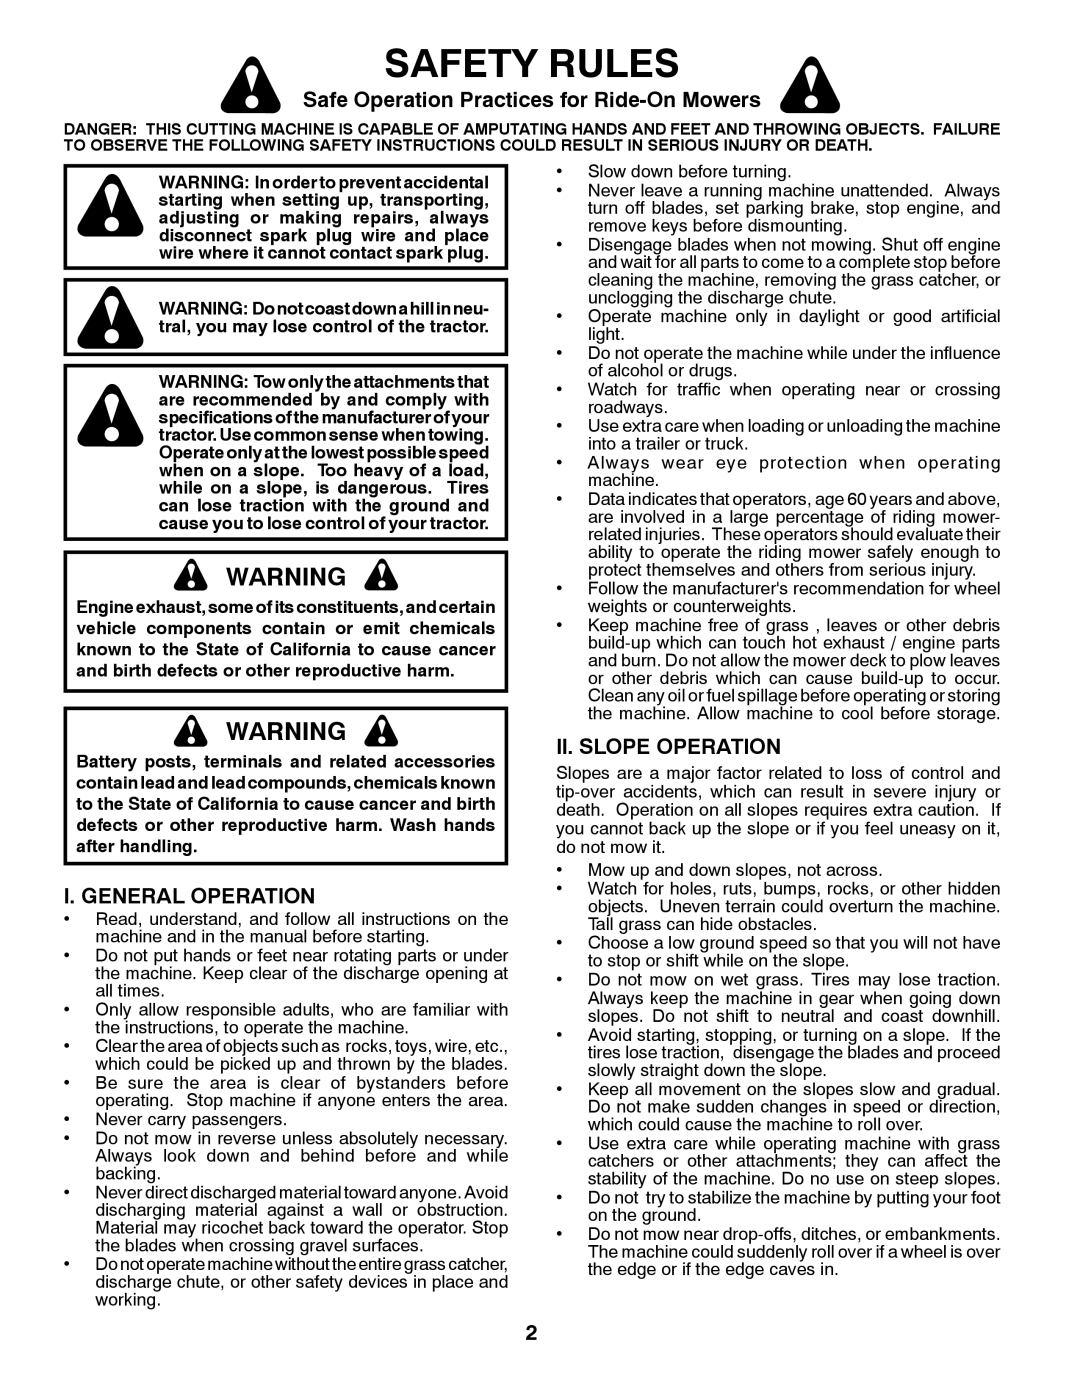 Husqvarna 96045002201 Safety Rules, Safe Operation Practices for Ride-On Mowers, I. General Operation, Ii. Slope Operation 